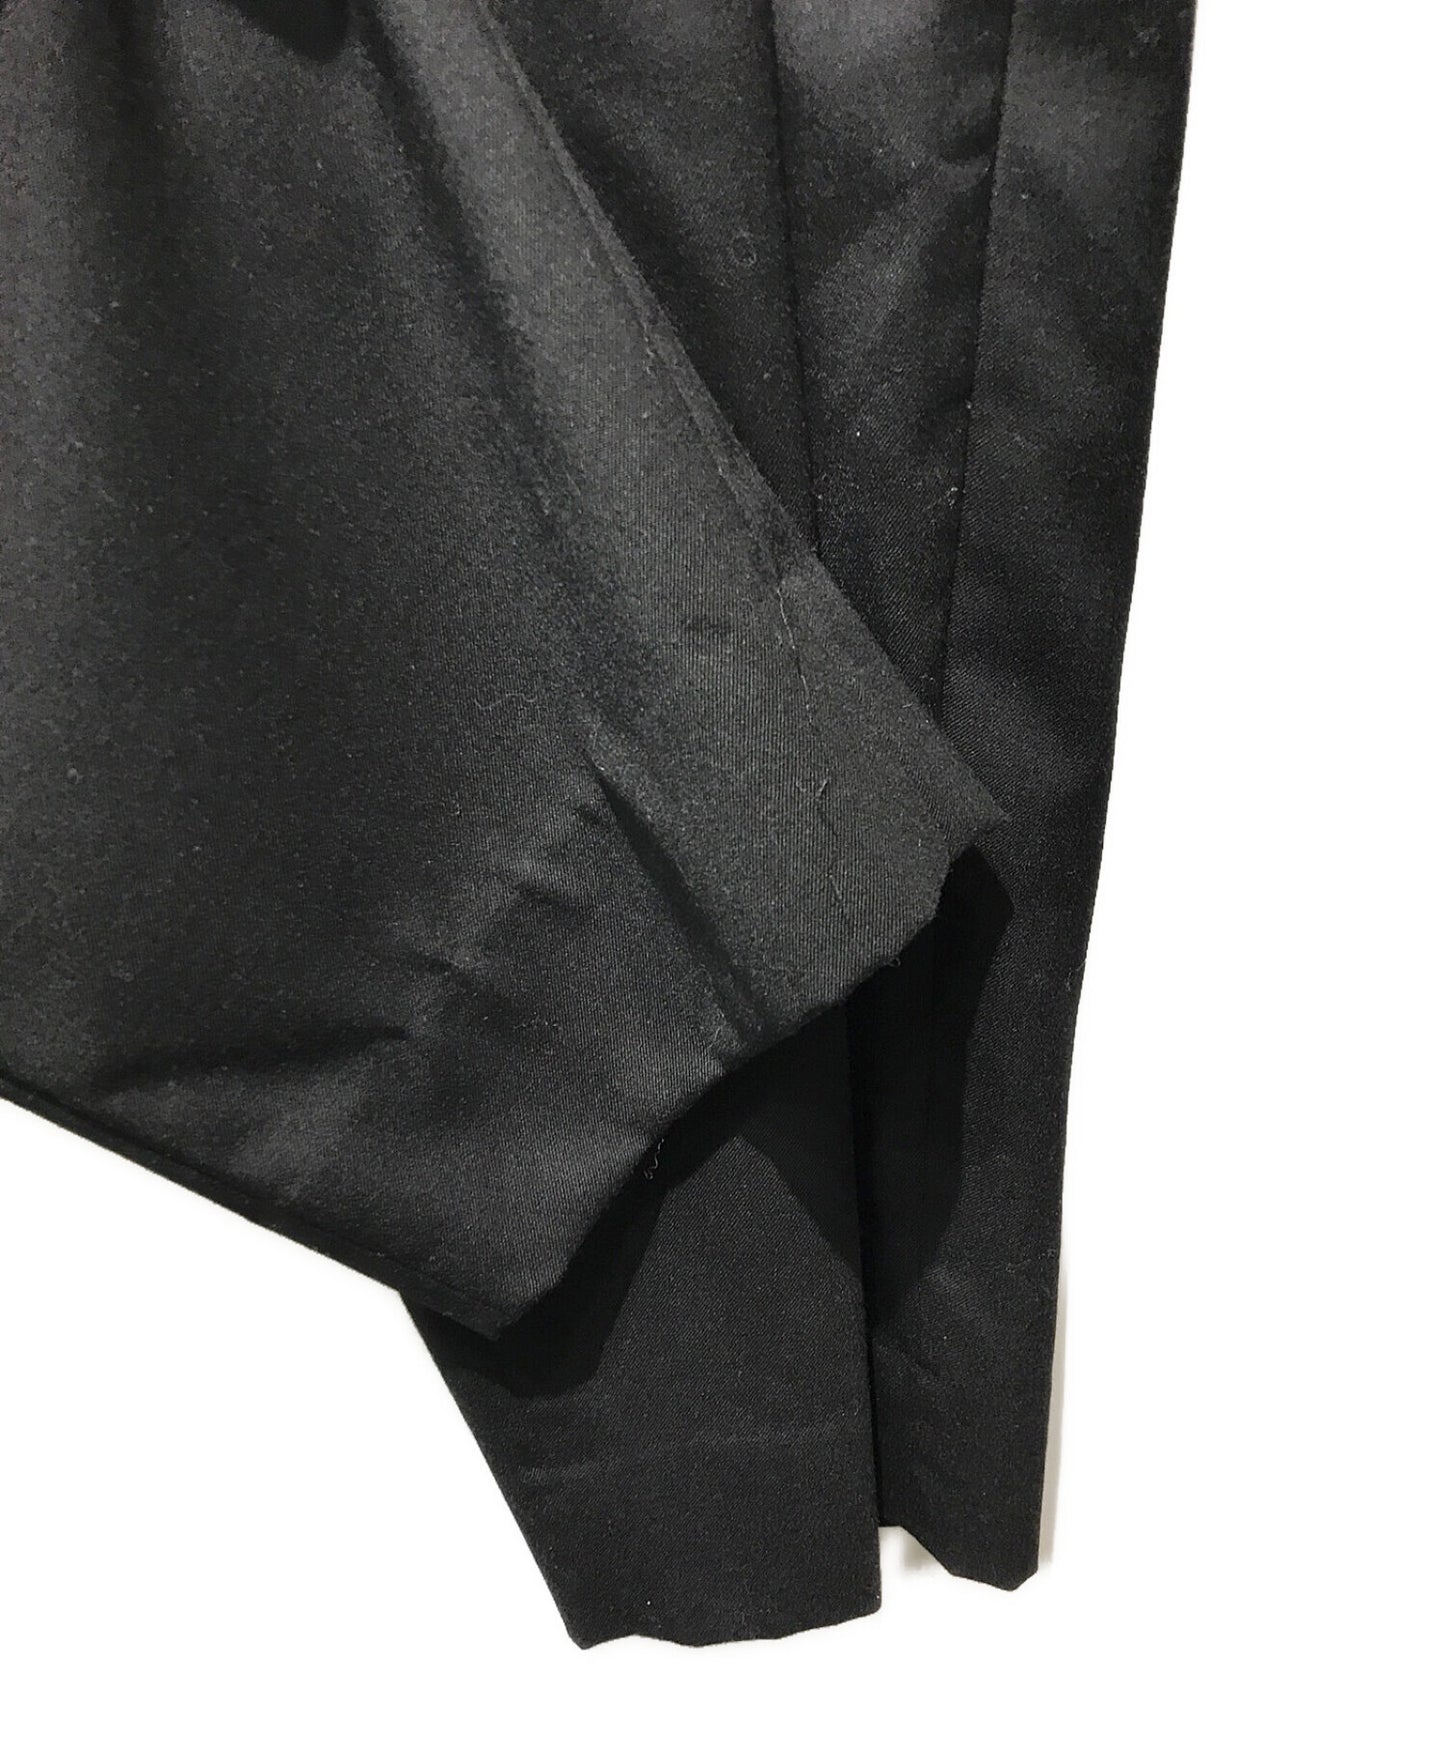 [Pre-owned] COMME des GARCONS HOMME PLUS Wool gaber wide tapered pants PP-P067 PP-P067